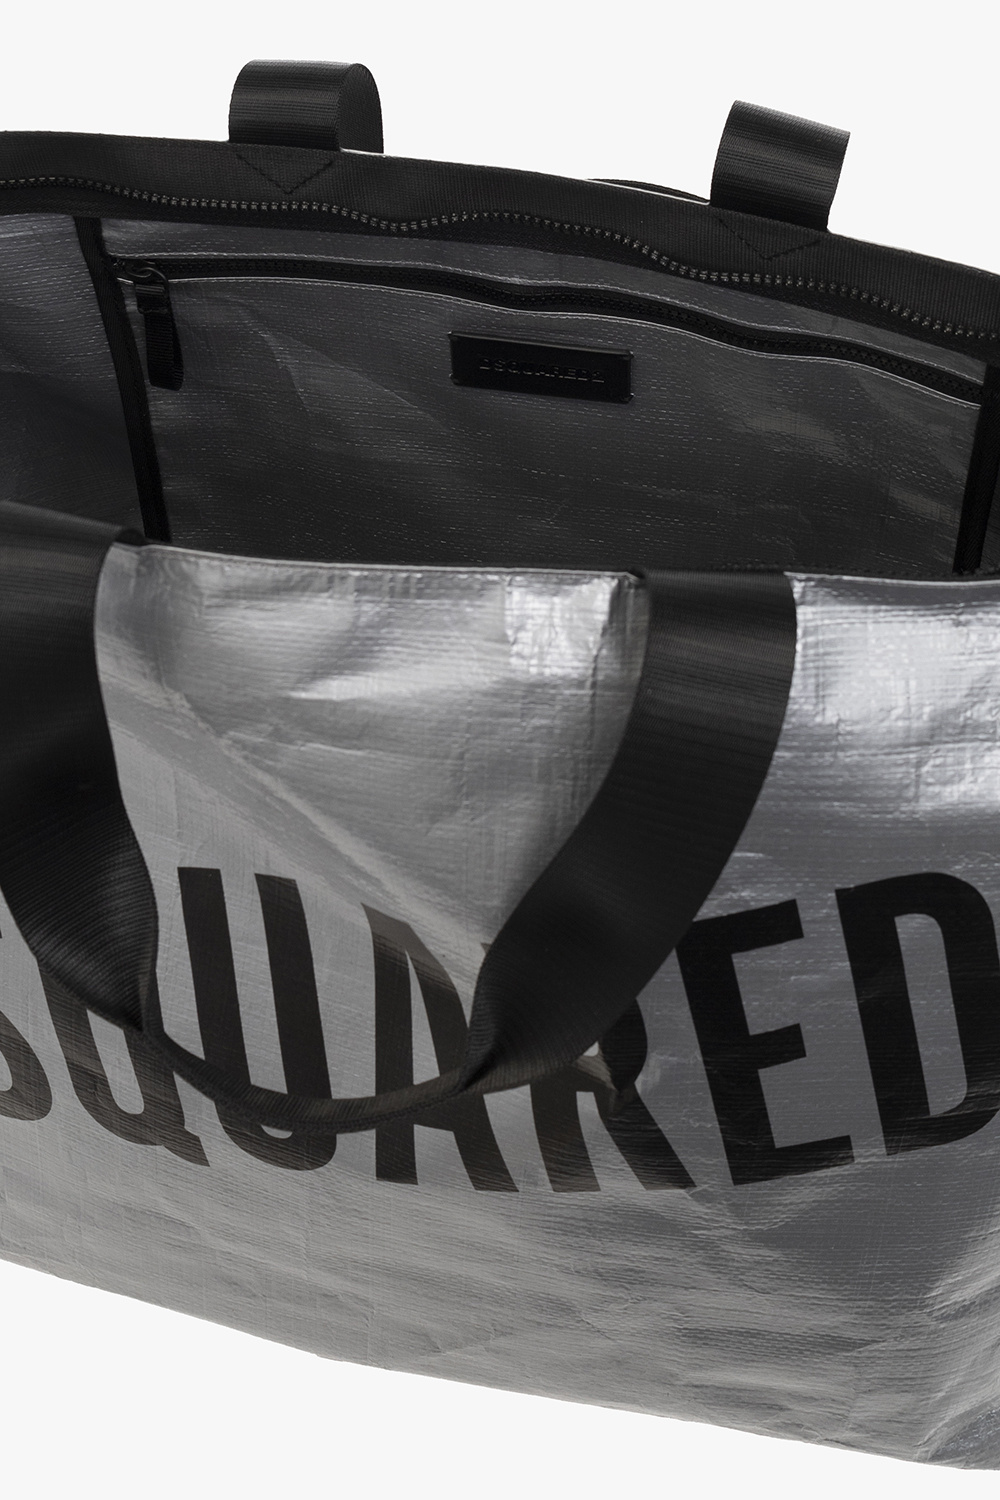 Dsquared2 Shopper bag heritage with logo